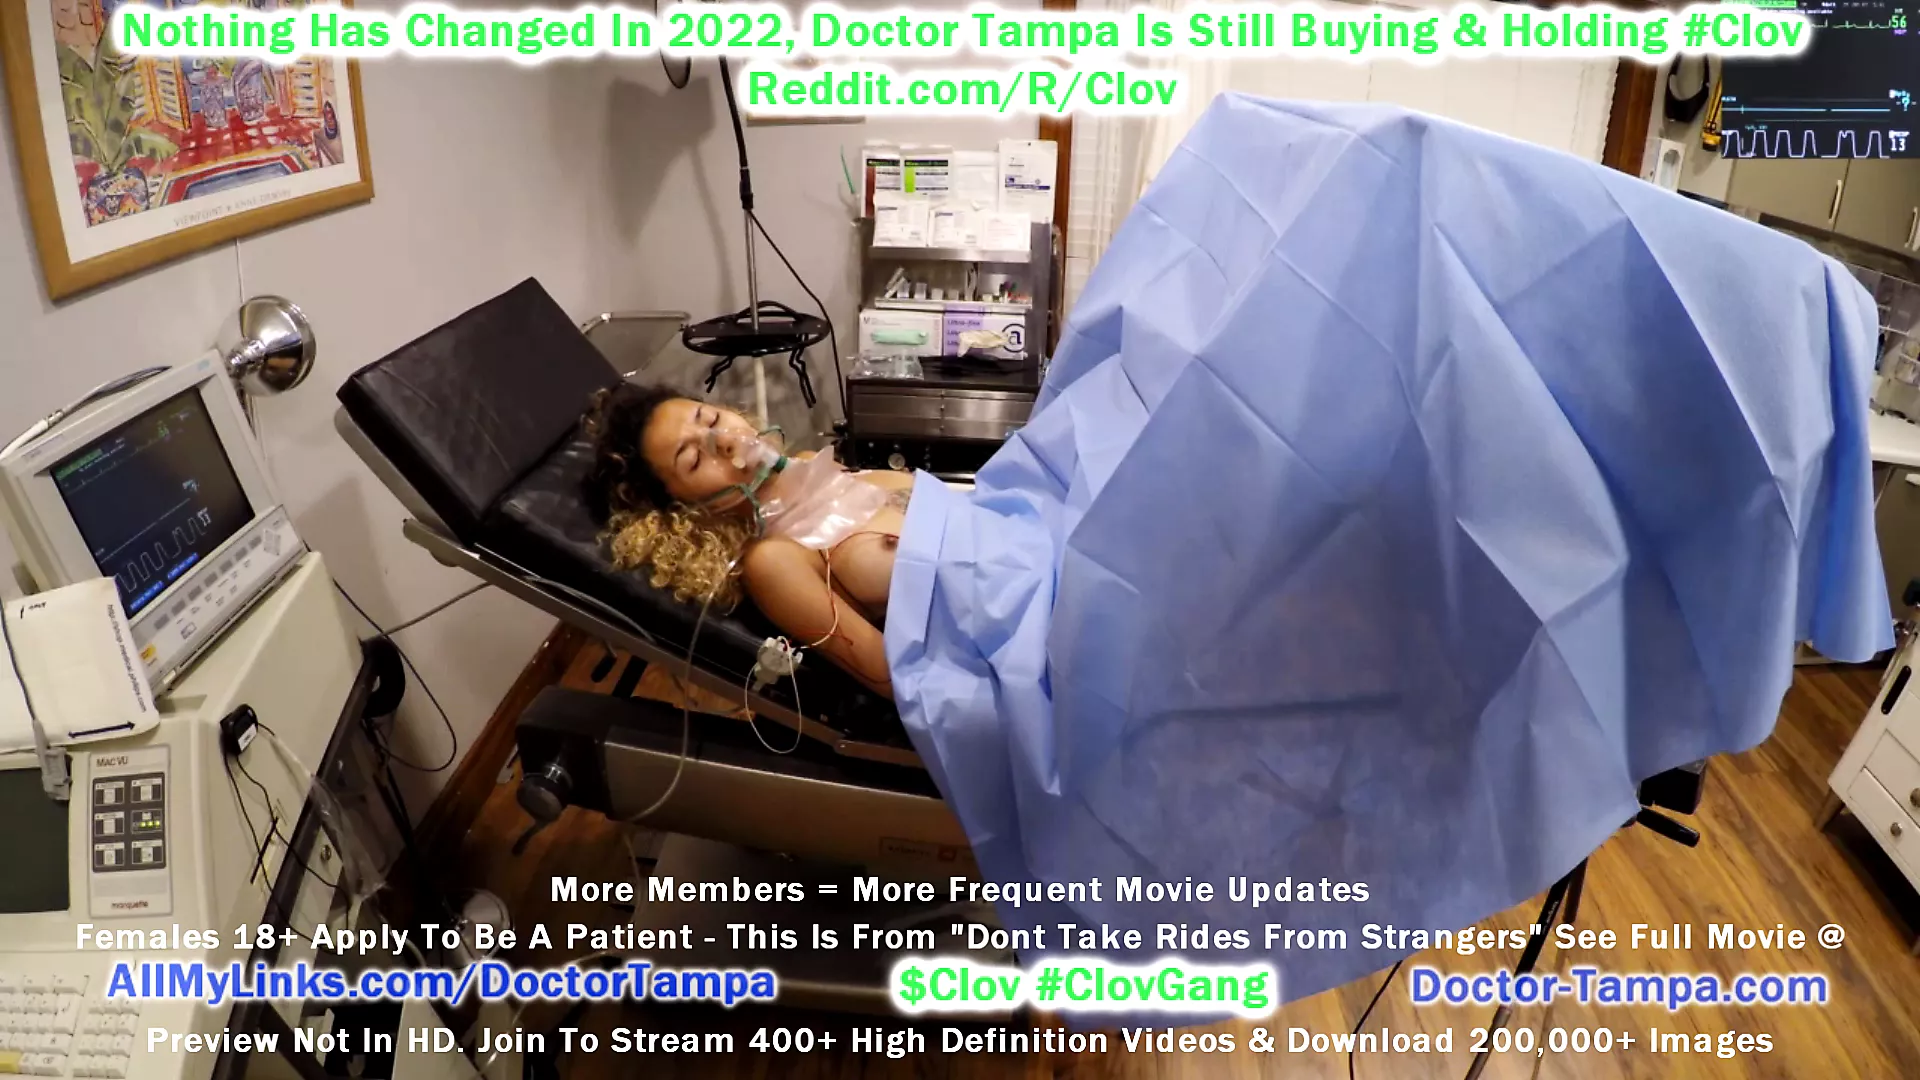 Clov Become Doctor Tampa After Kalani Luana Wakes Up On Side Of The Road and Takes A Ride From Stranger Doctor-TampaCom image